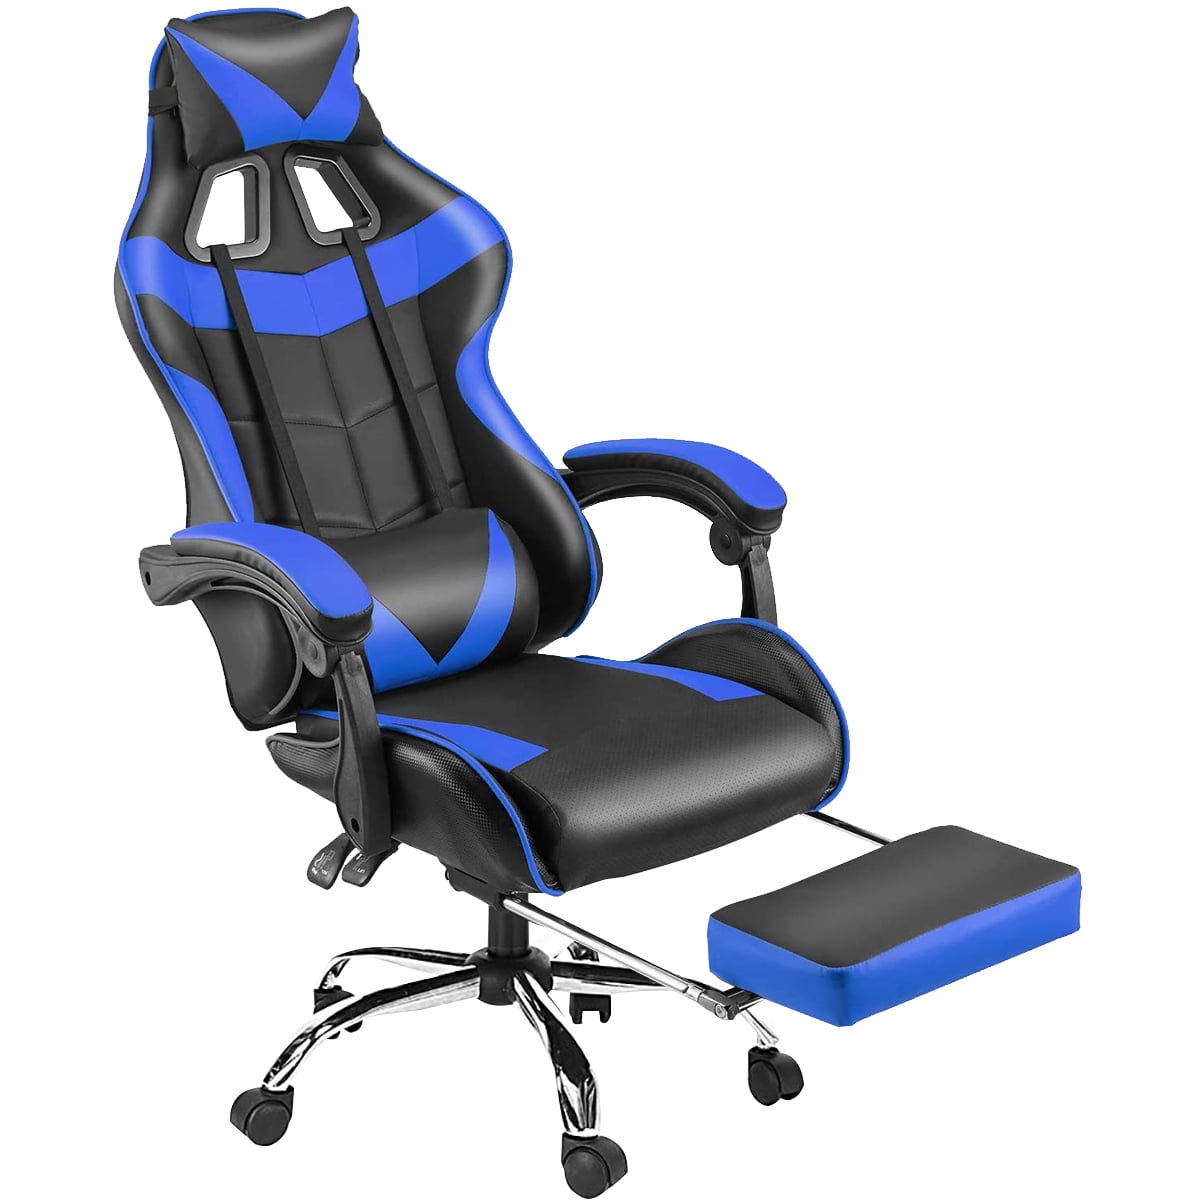 Blue Merax Racing Desk Gaming Ergonomic Footrest and Adjustable Armrests Home Office Computer Chair 